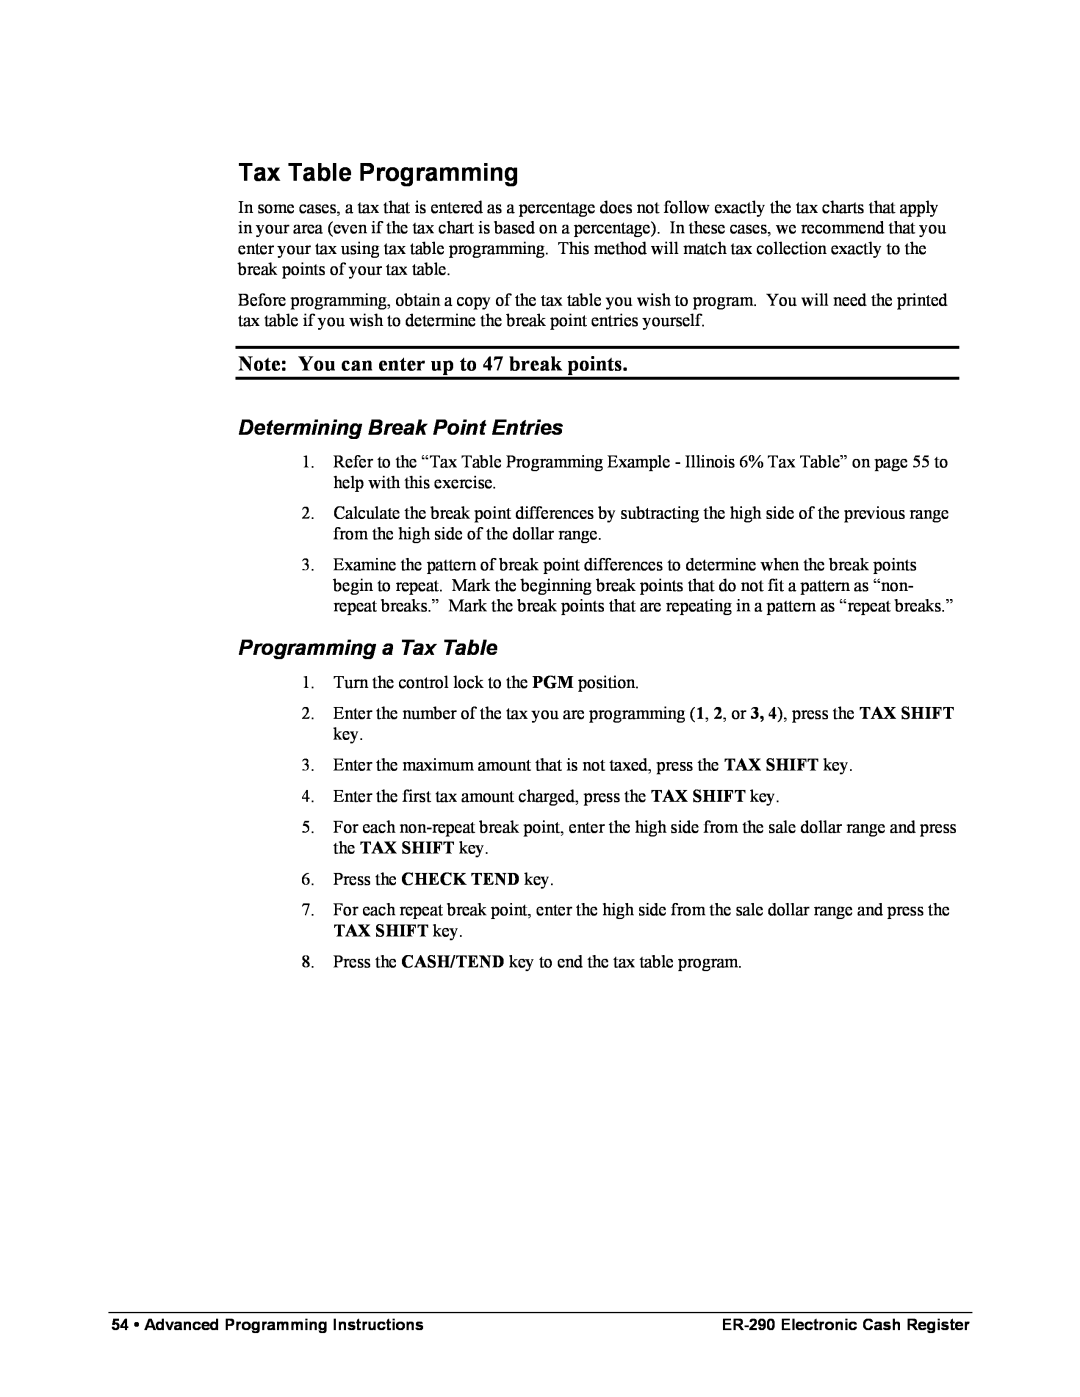 Samsung M-ER290 Tax Table Programming, Note You can enter up to 47 break points, Determining Break Point Entries 